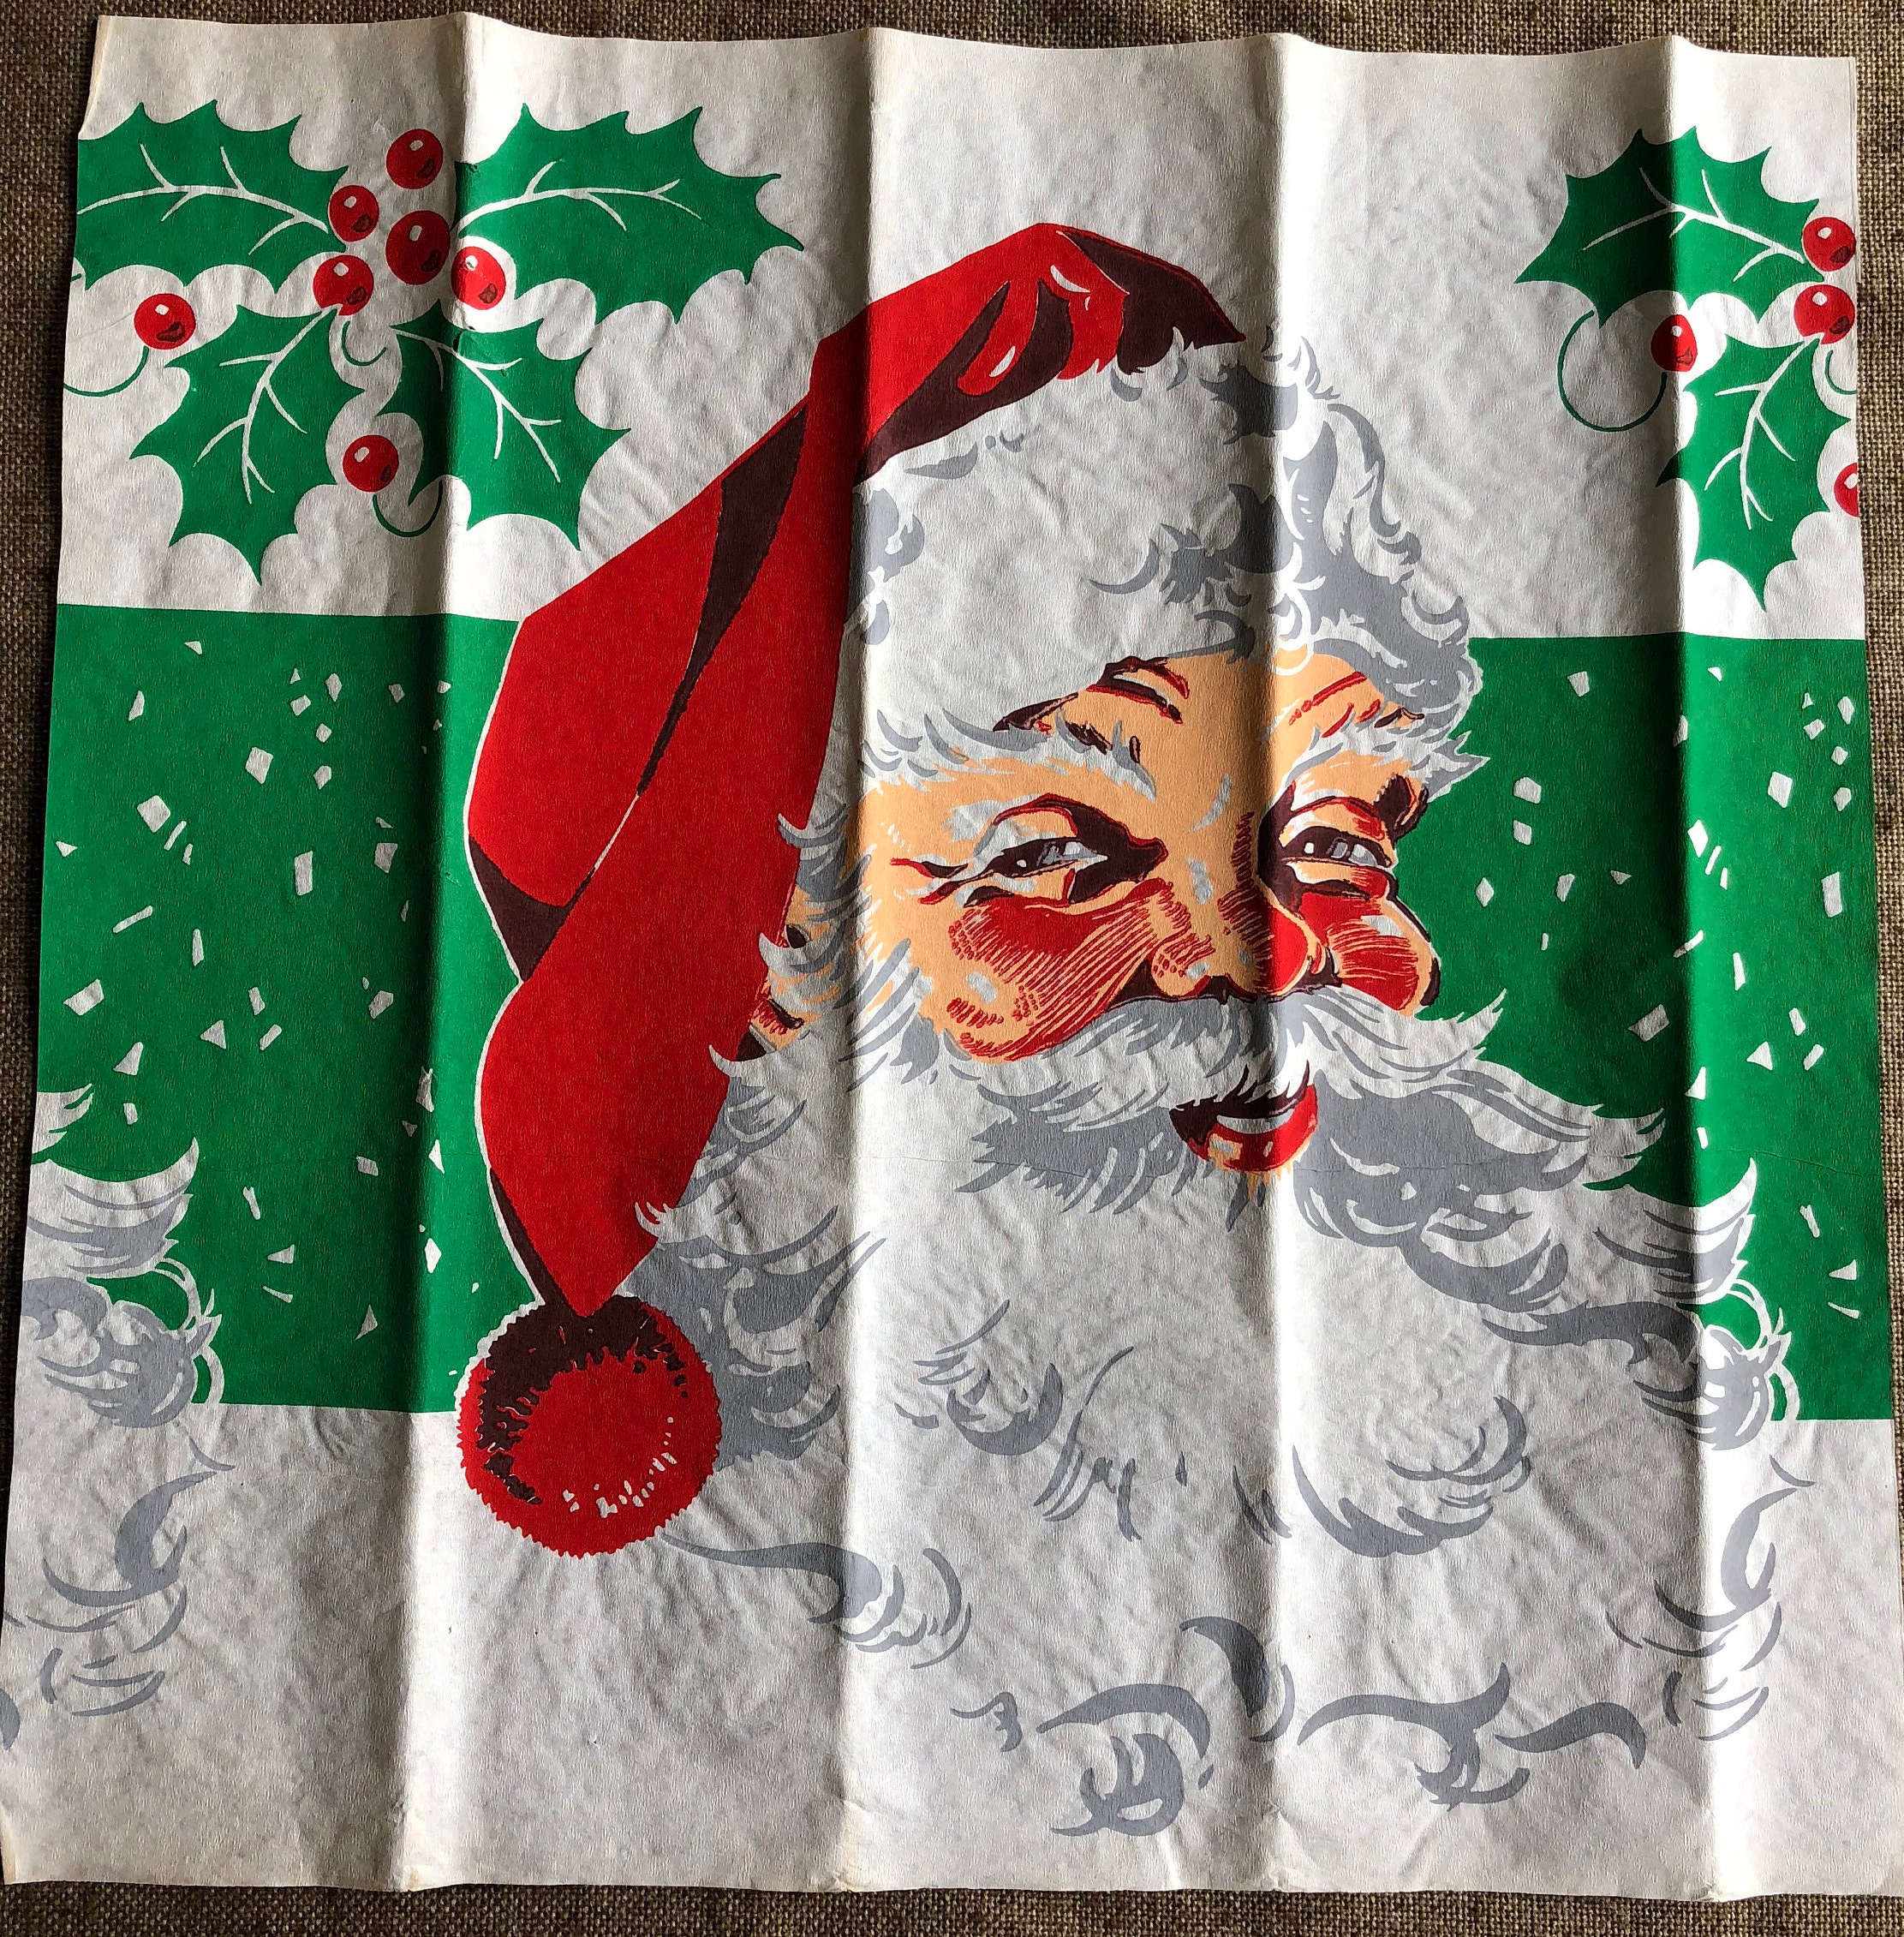 1940s Christmas Wrapping Paper/tissue Paper Santa Face Snowman Candy Canes  Ornaments on Blue Vintage Christmas Gift Wrap One Flat Sheet 